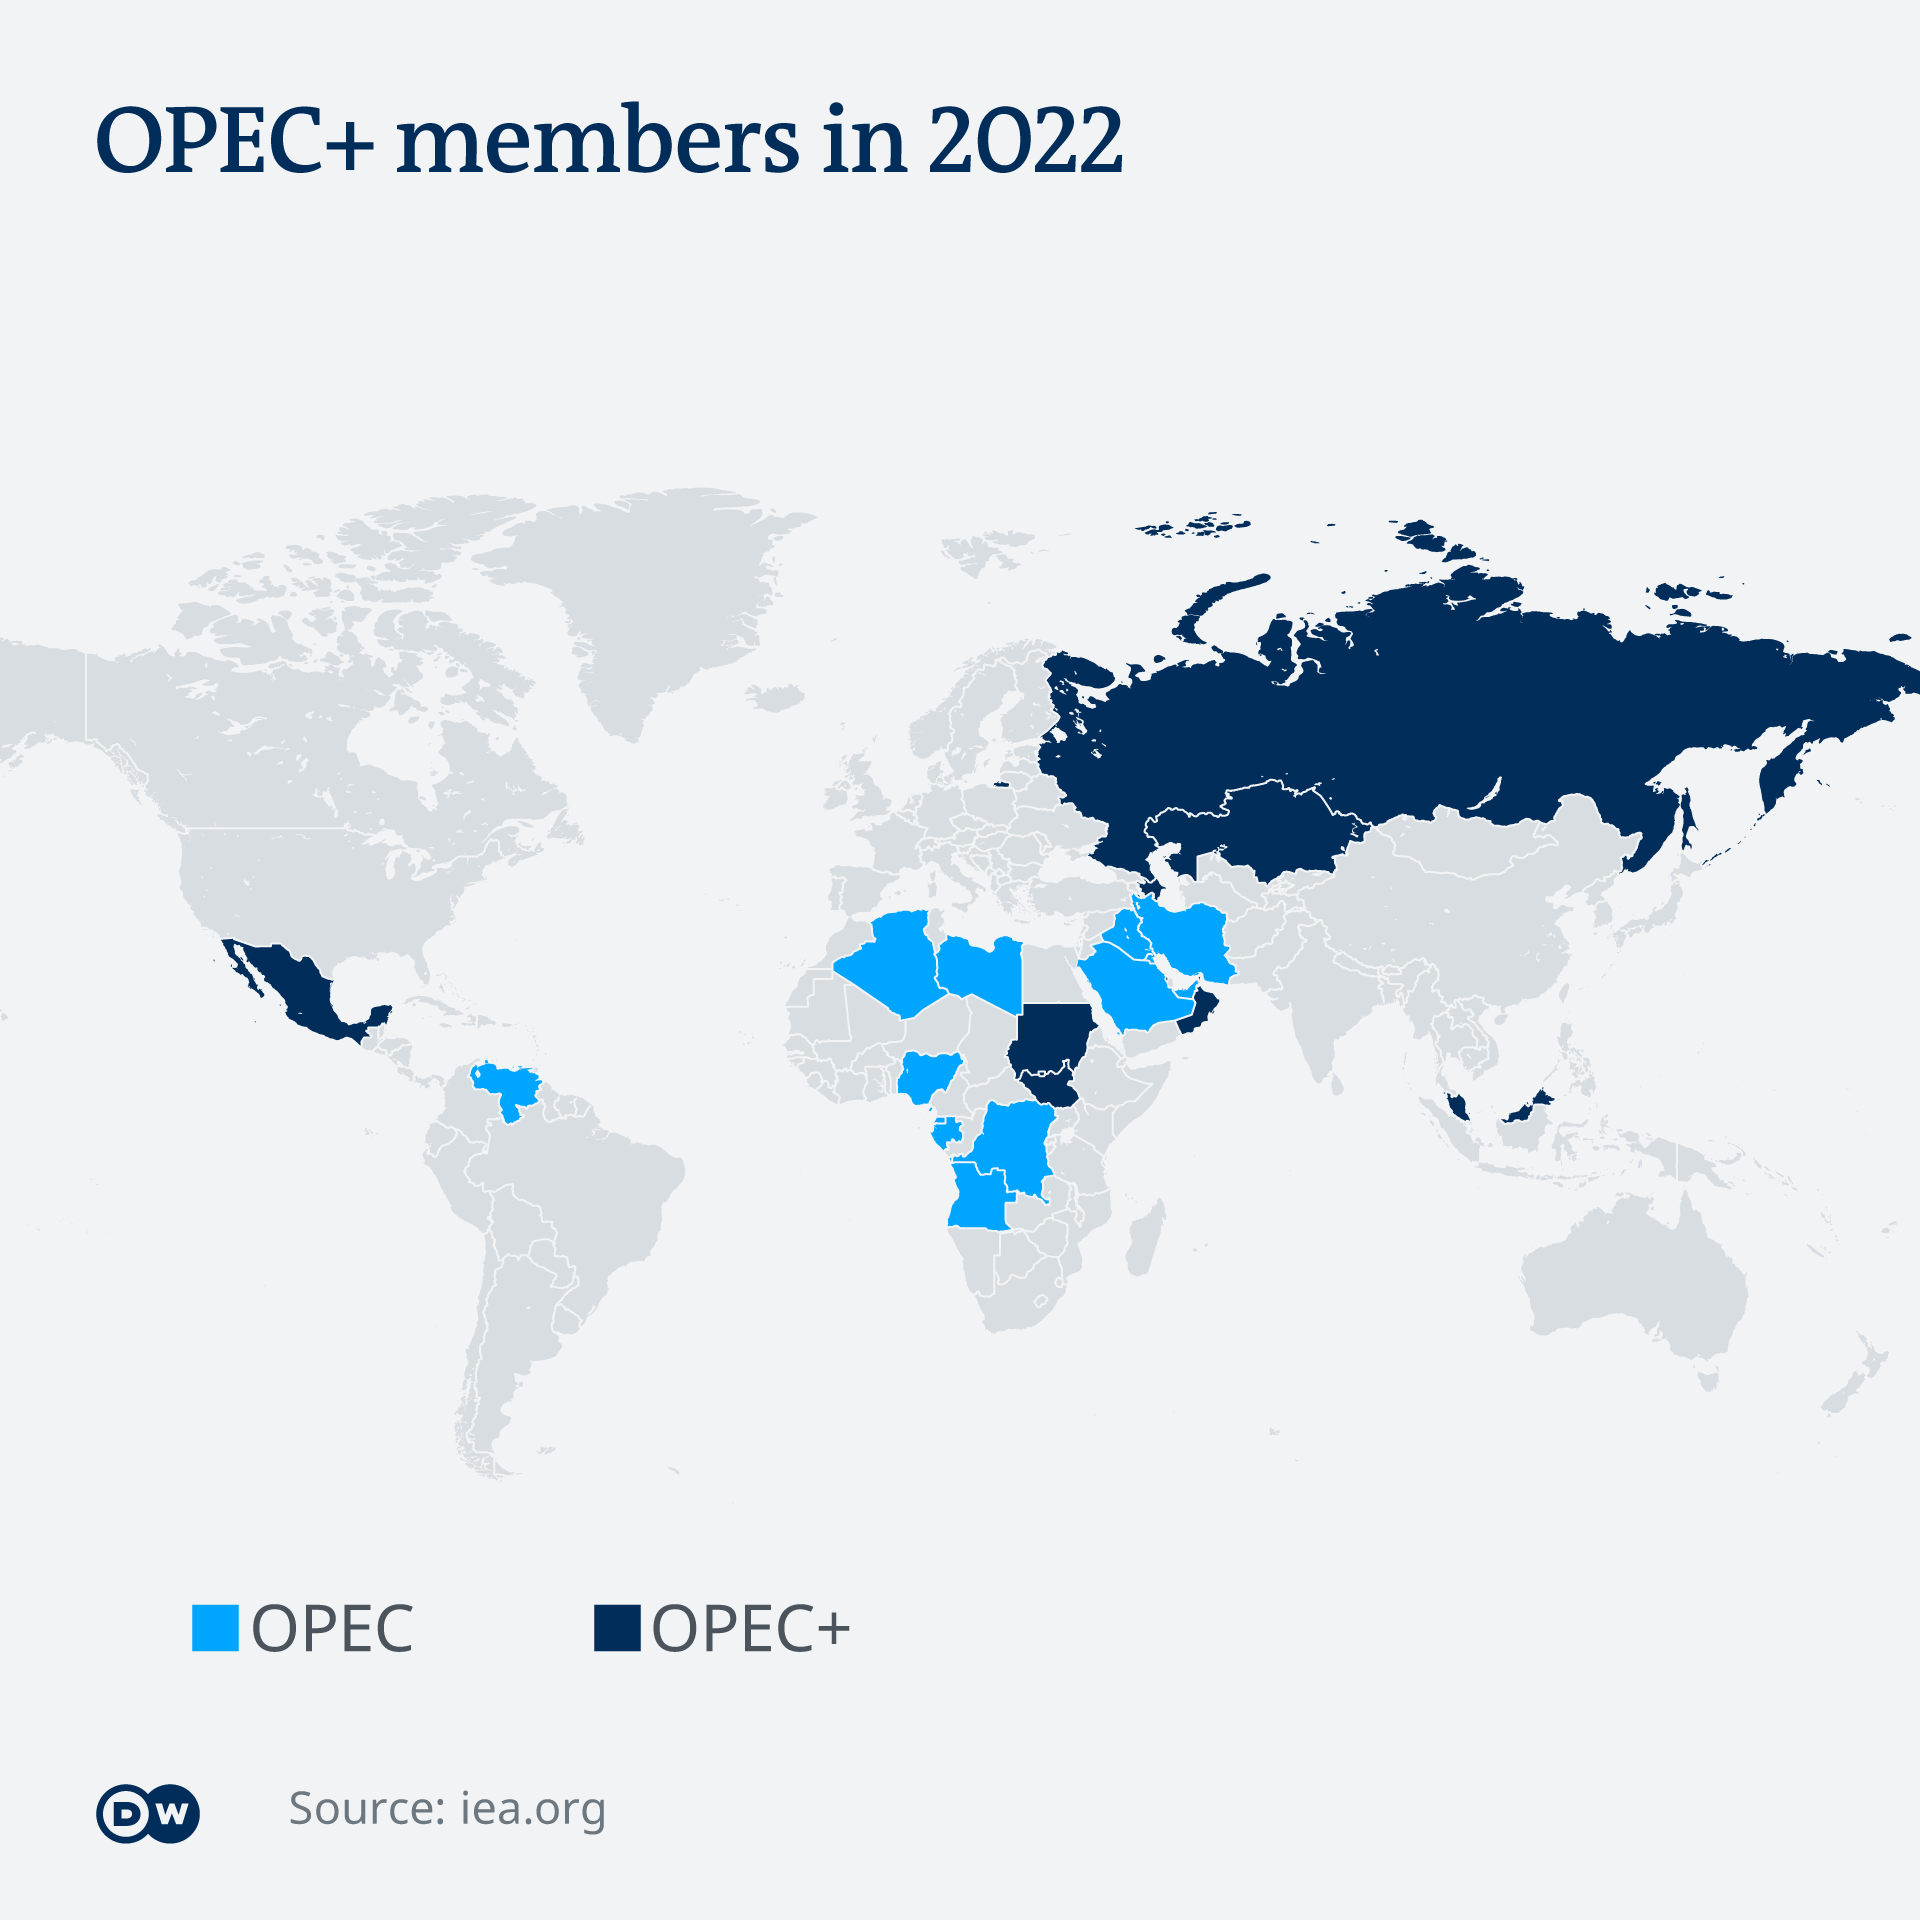 A map showing the OPEC+ member states